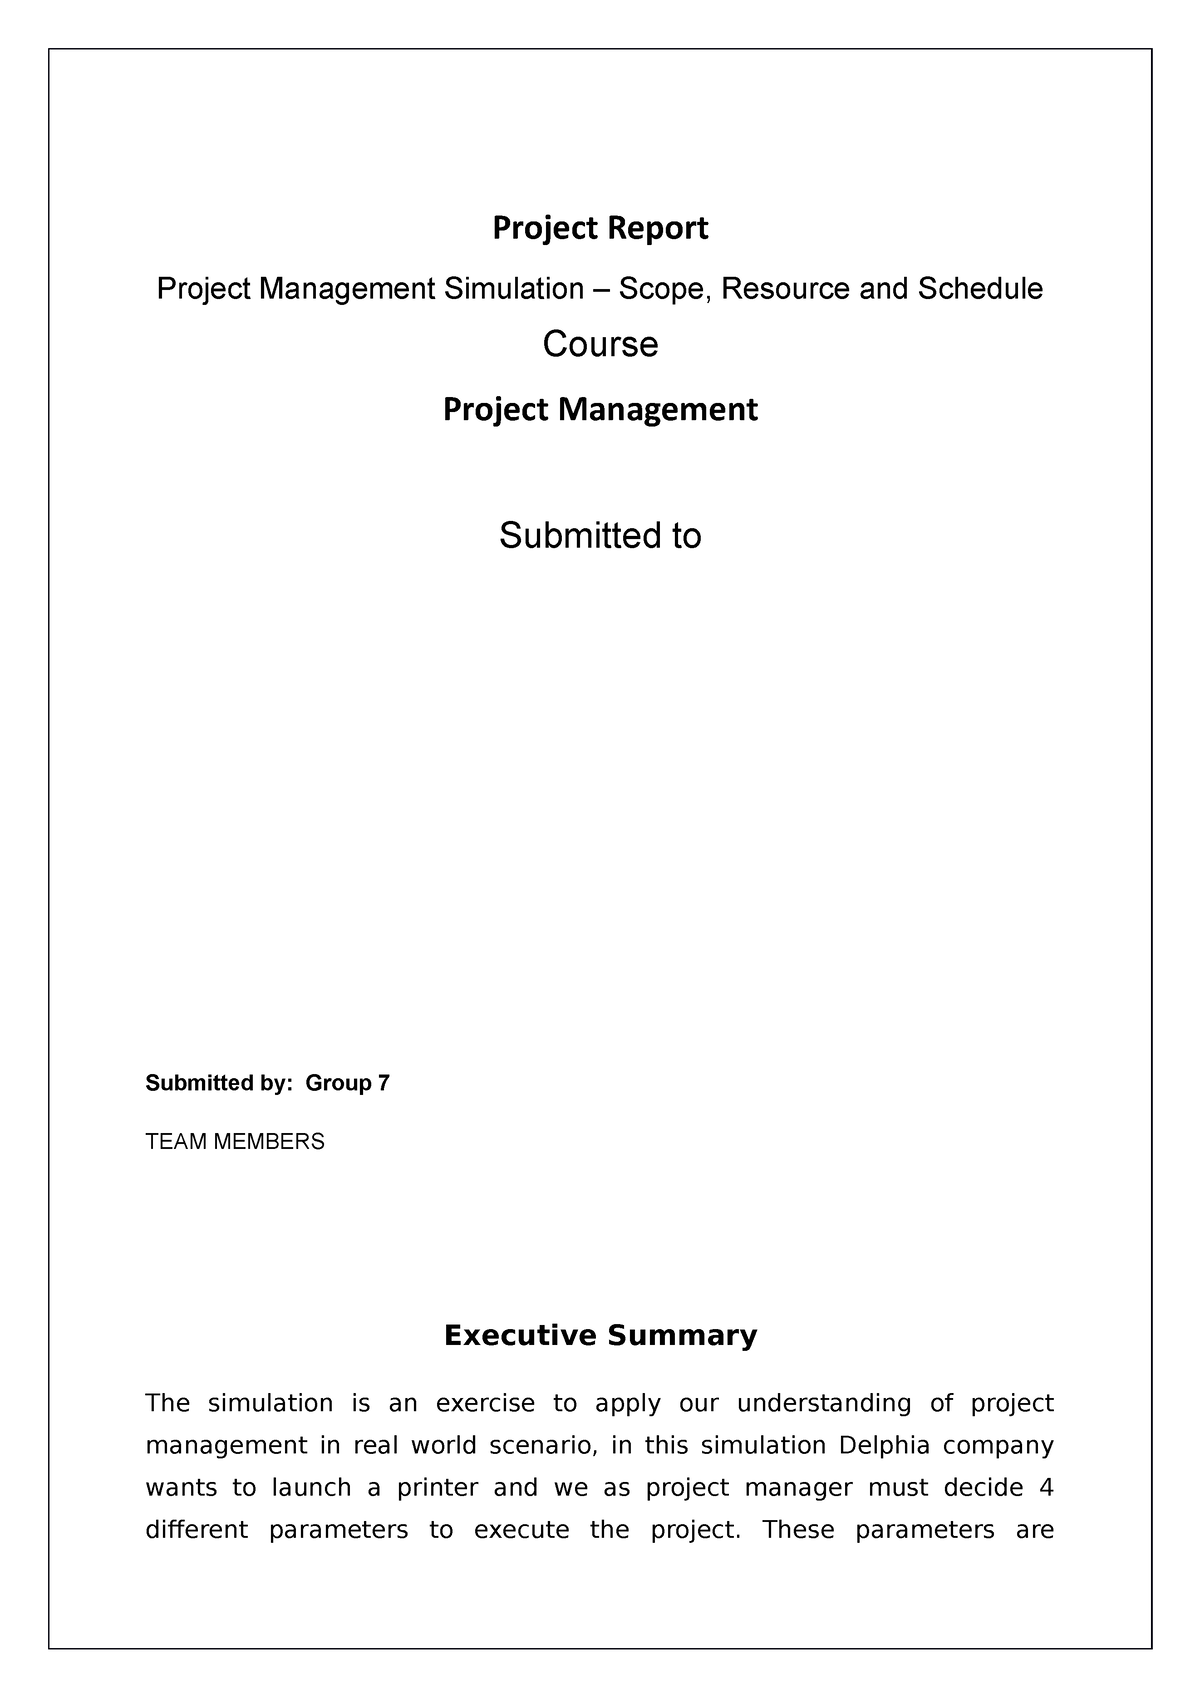 Simulation report Project Management - Project Report Project ...